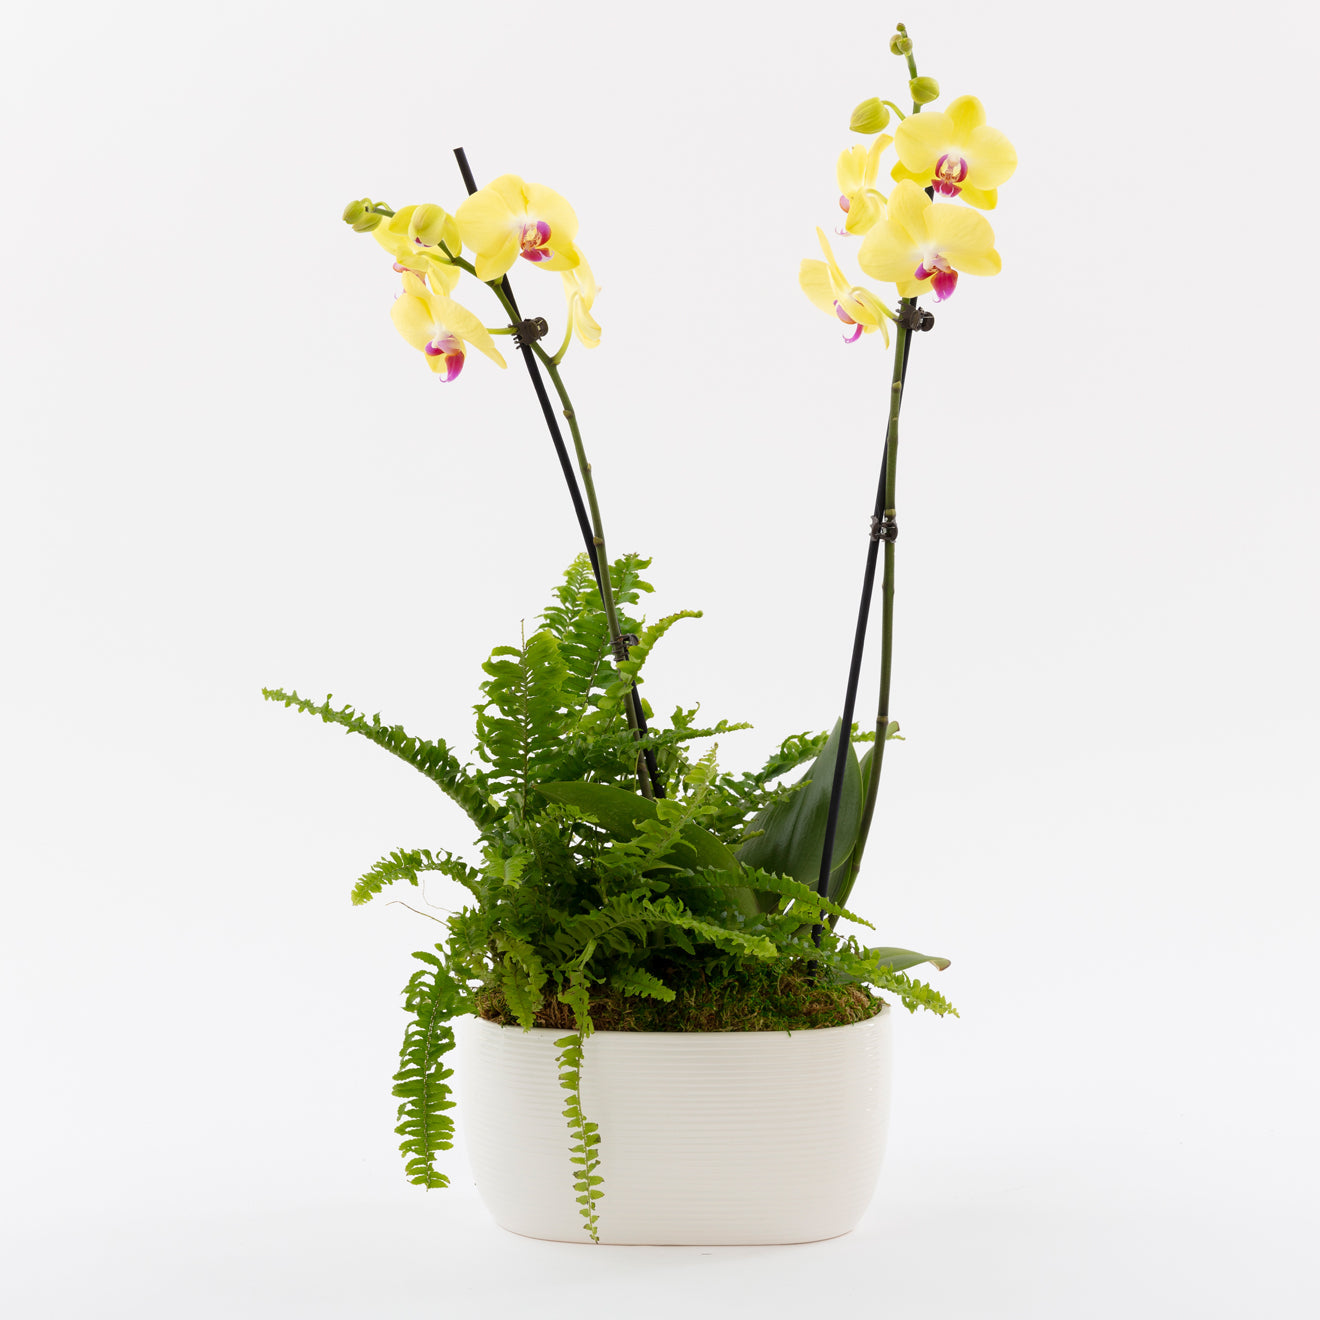 Yellow Orchid and Fluffy Ruffles Fern Garden by BloomsyBox